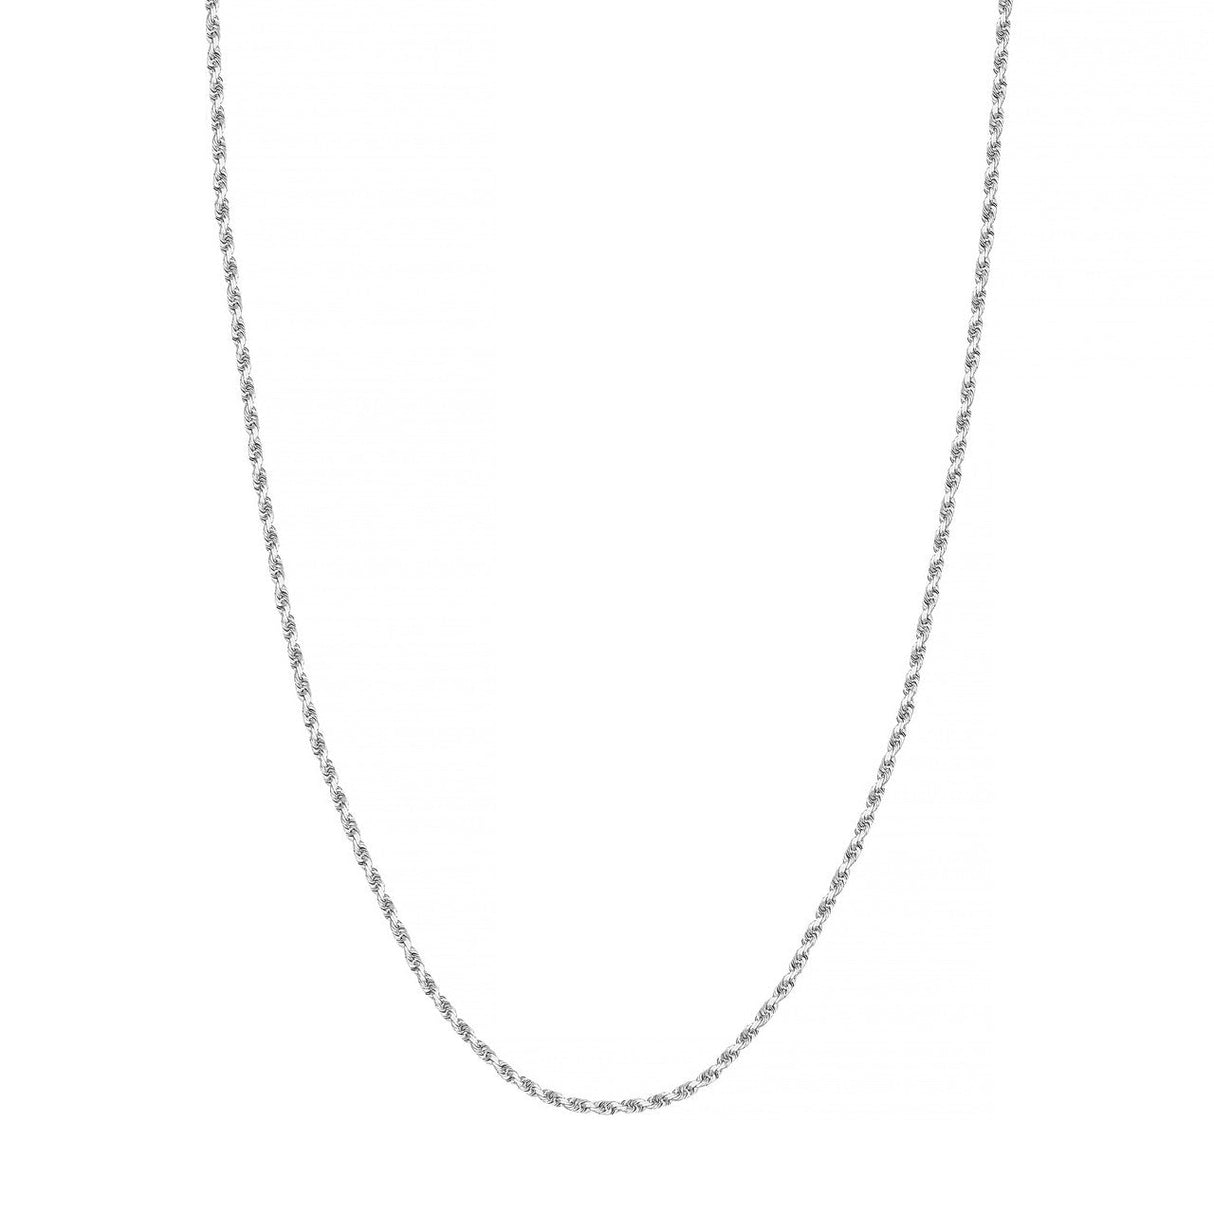 14K Gold Chain, 20", 2.15mm D/C Rope Chain with Lobster Lock, Gold Layered Chain, Gold Chain Necklace, - Diamond Origin